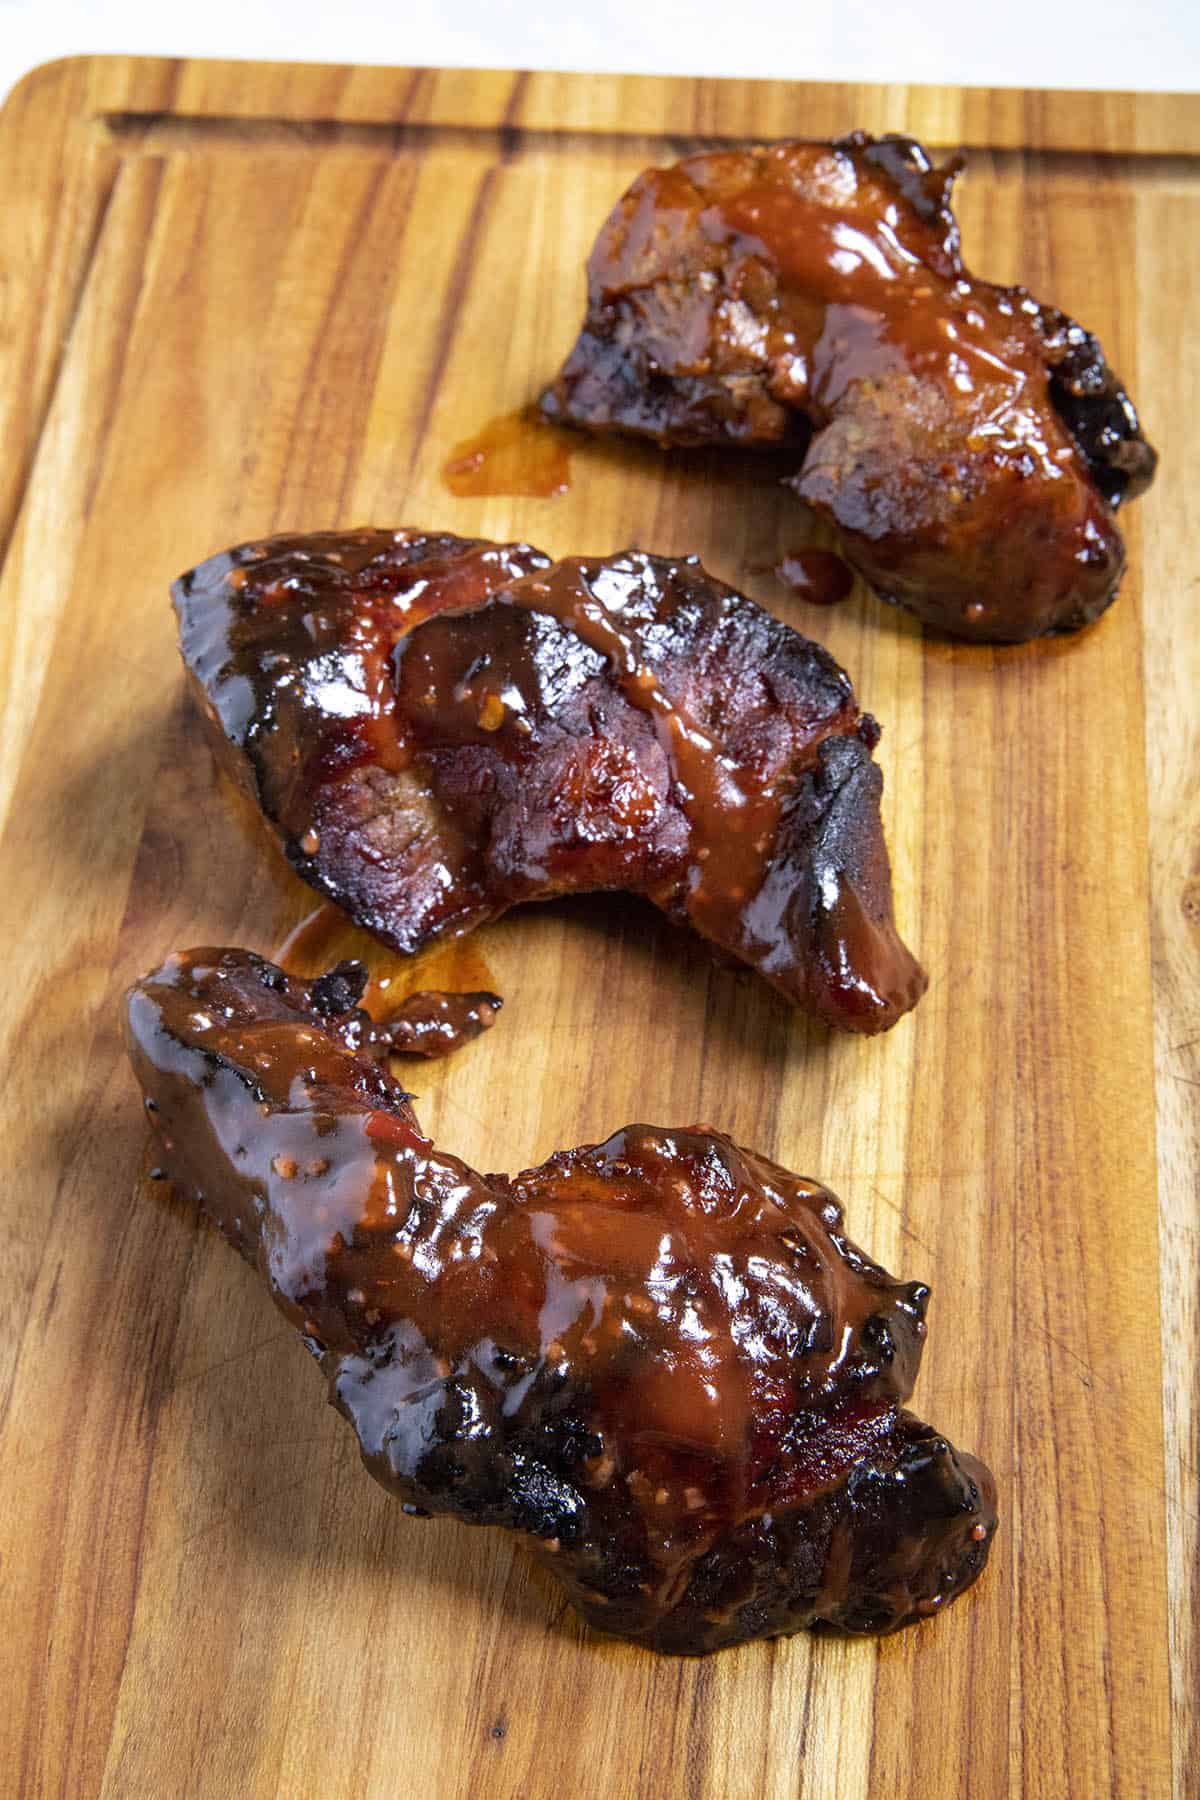 Chinese BBQ Pork (Char Siu) just out of the oven